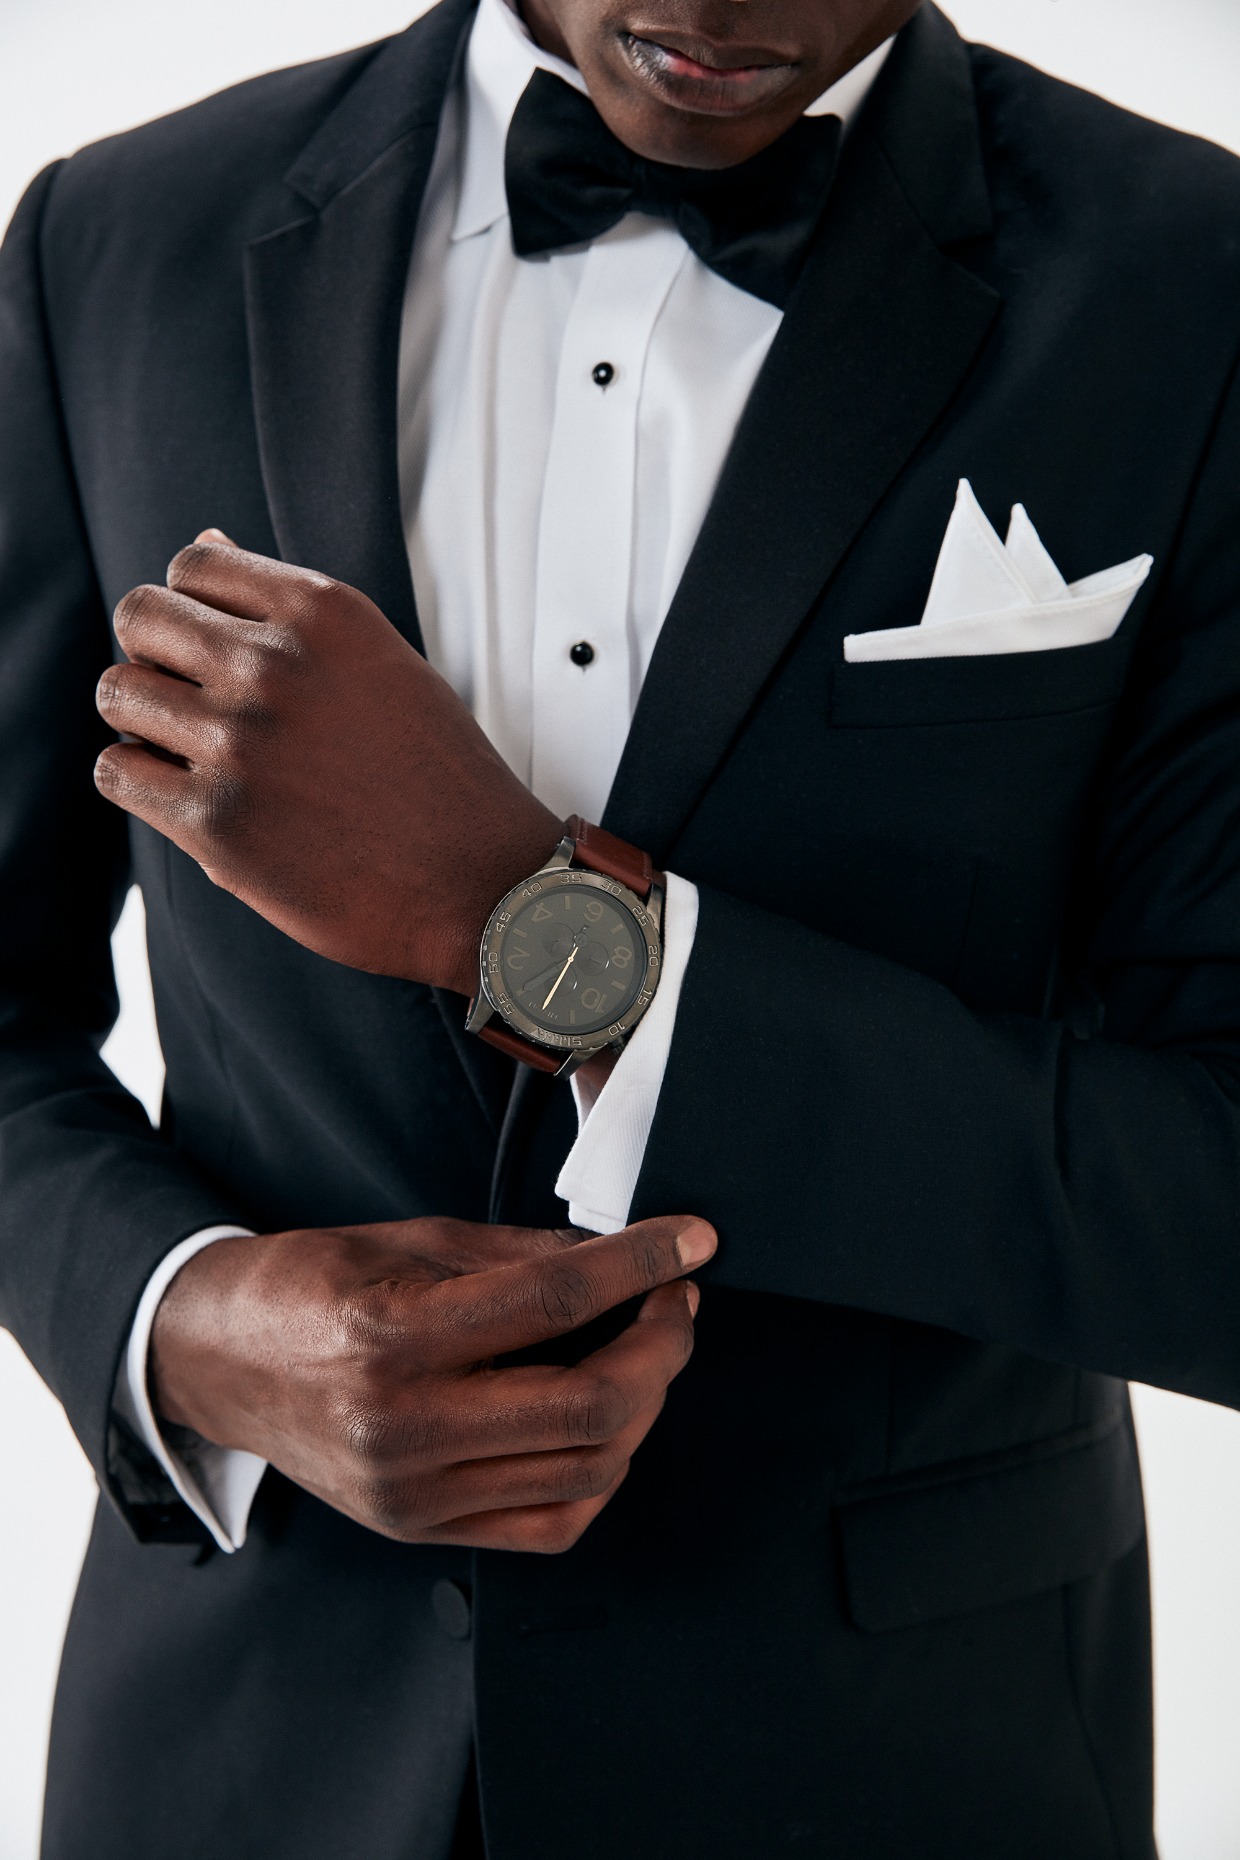 Nixon watches are the perfect gift for everyone in your wedding party